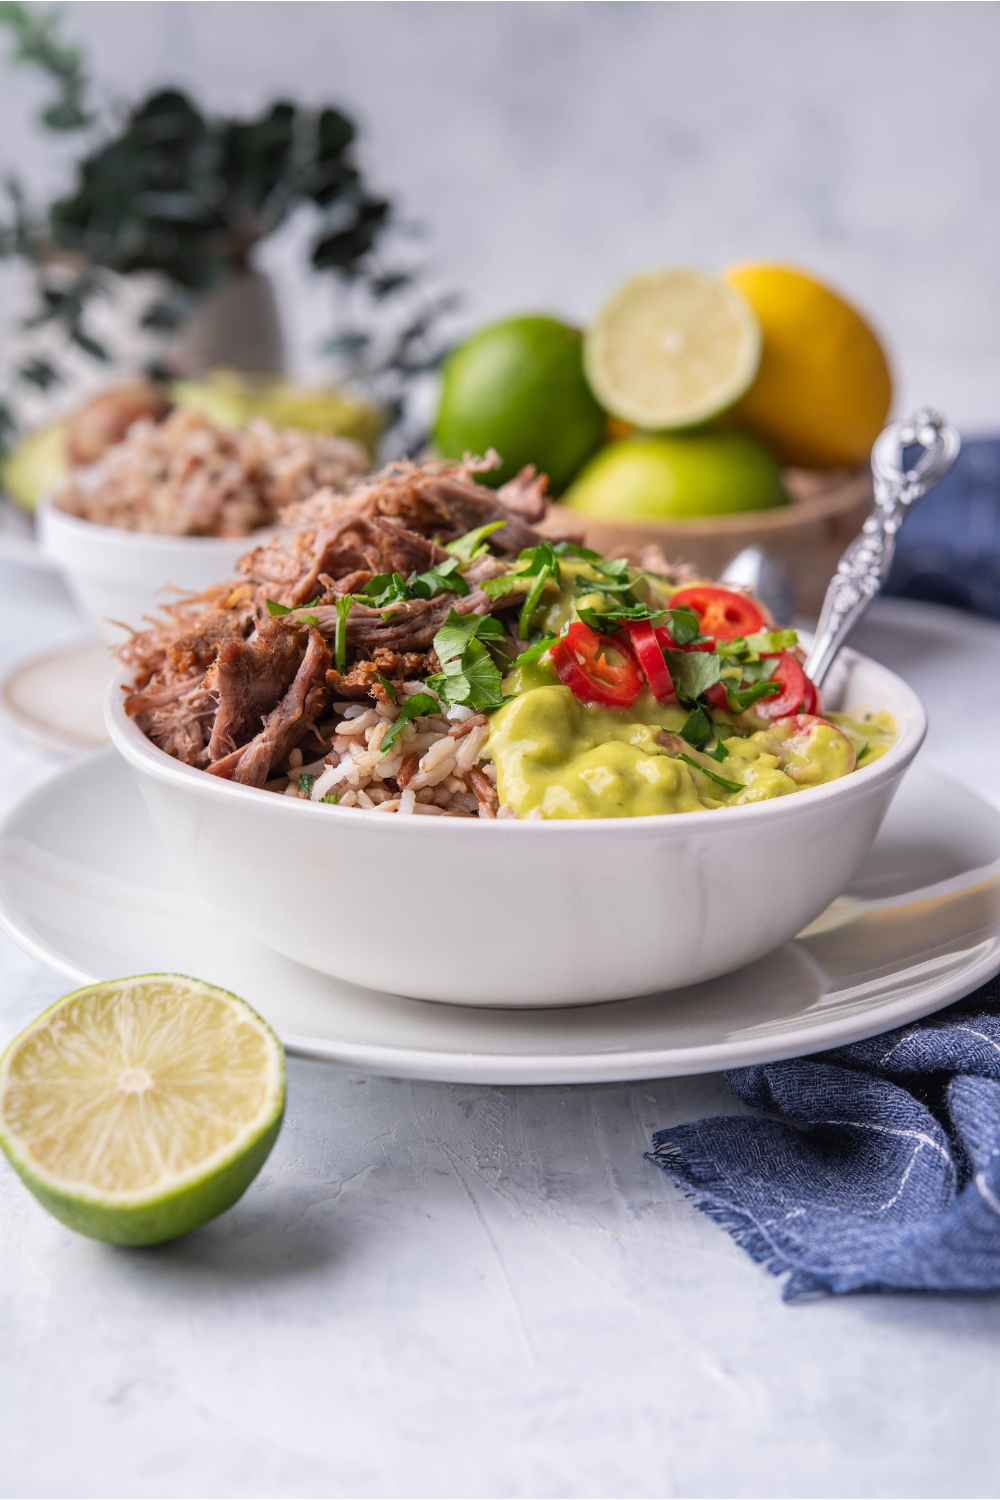 Shredded barbacoa in a bowl with brown rice, sliced peppers, guacamole, and fresh herbs.